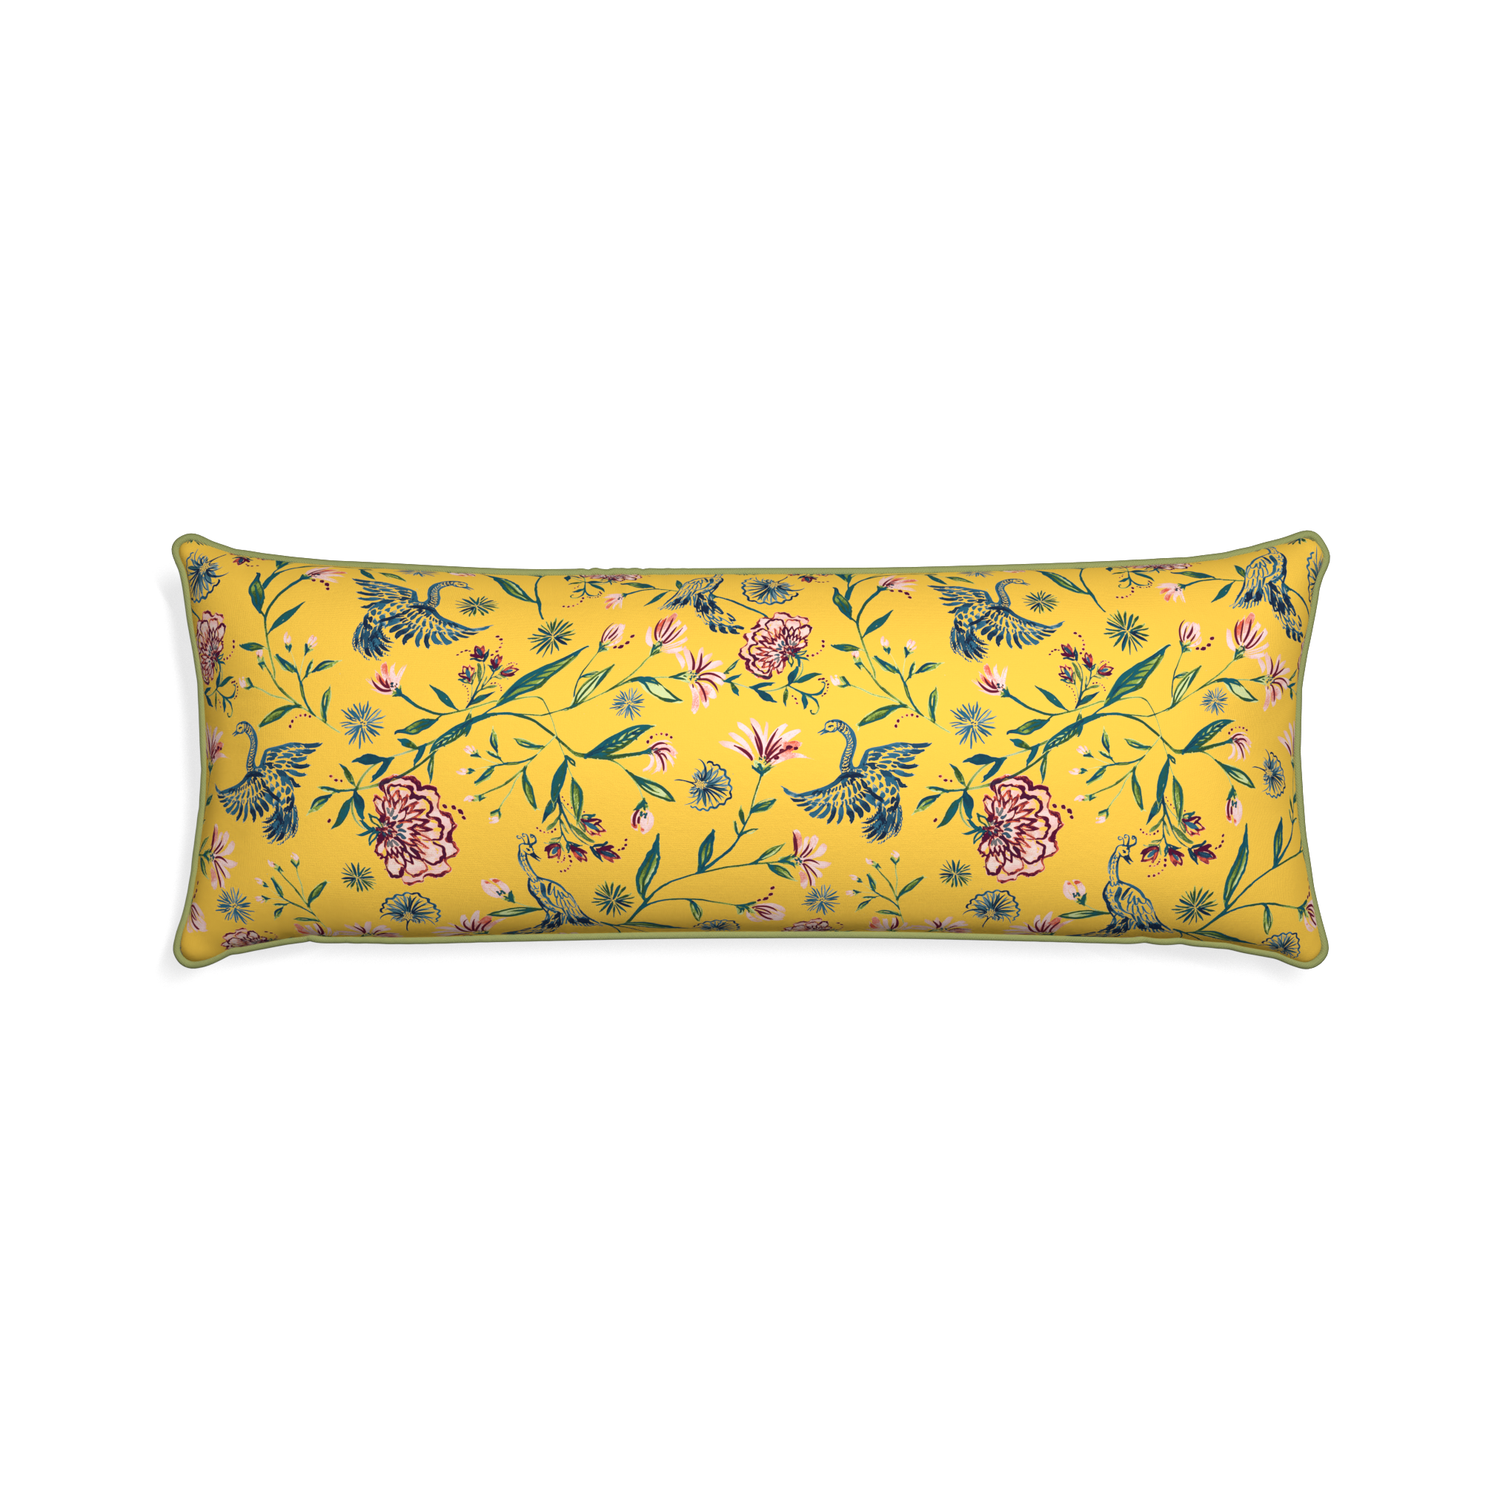 Xl-lumbar daphne canary custom pillow with moss piping on white background